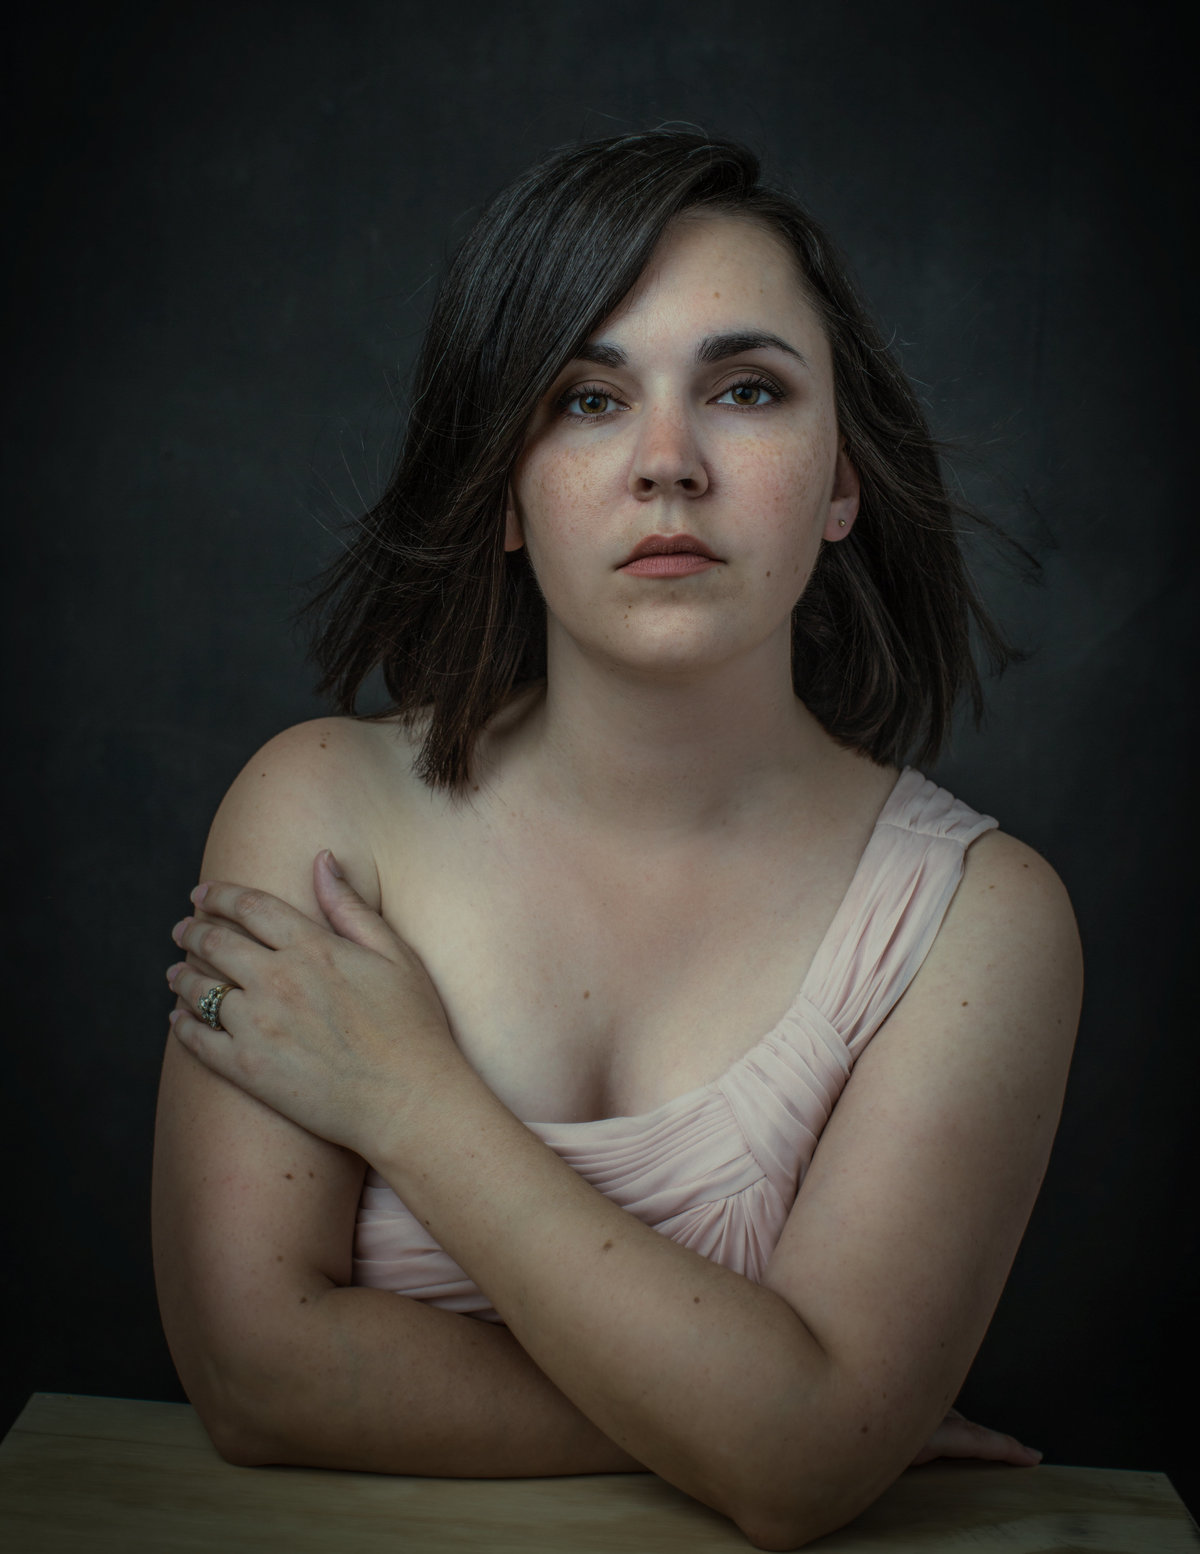 A woman with shoulder dark hair places her left hand on her right shoulder as she poses for a portrait photo at Janel Lee Photography studios in Cincinnati Ohio